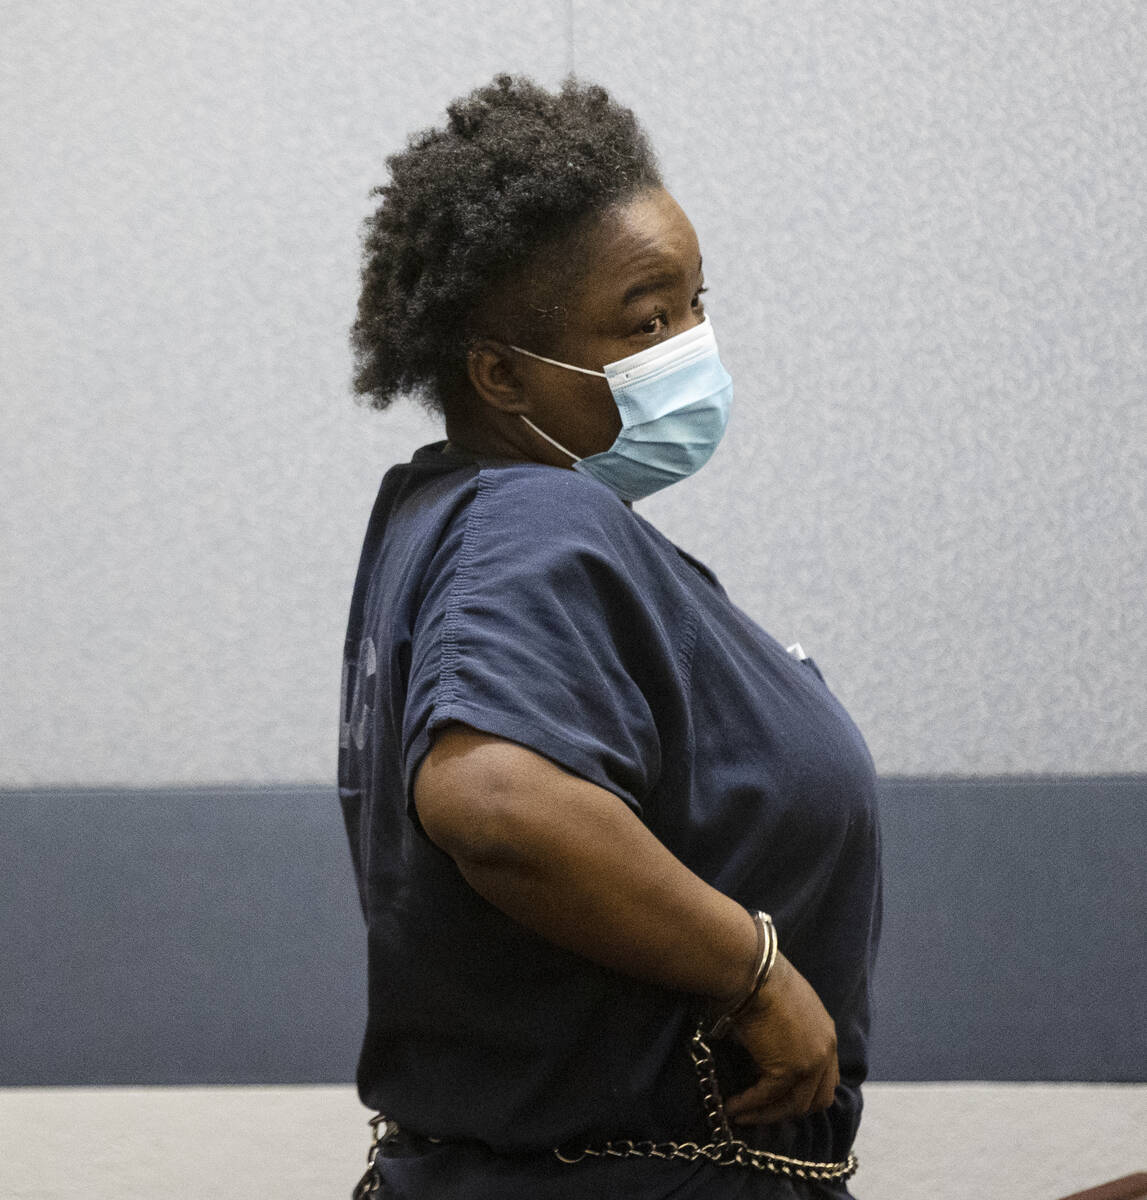 Jaquitta Madison appears in court at the Regional Justice Center, on Tuesday, Dec. 7, 2021, in ...